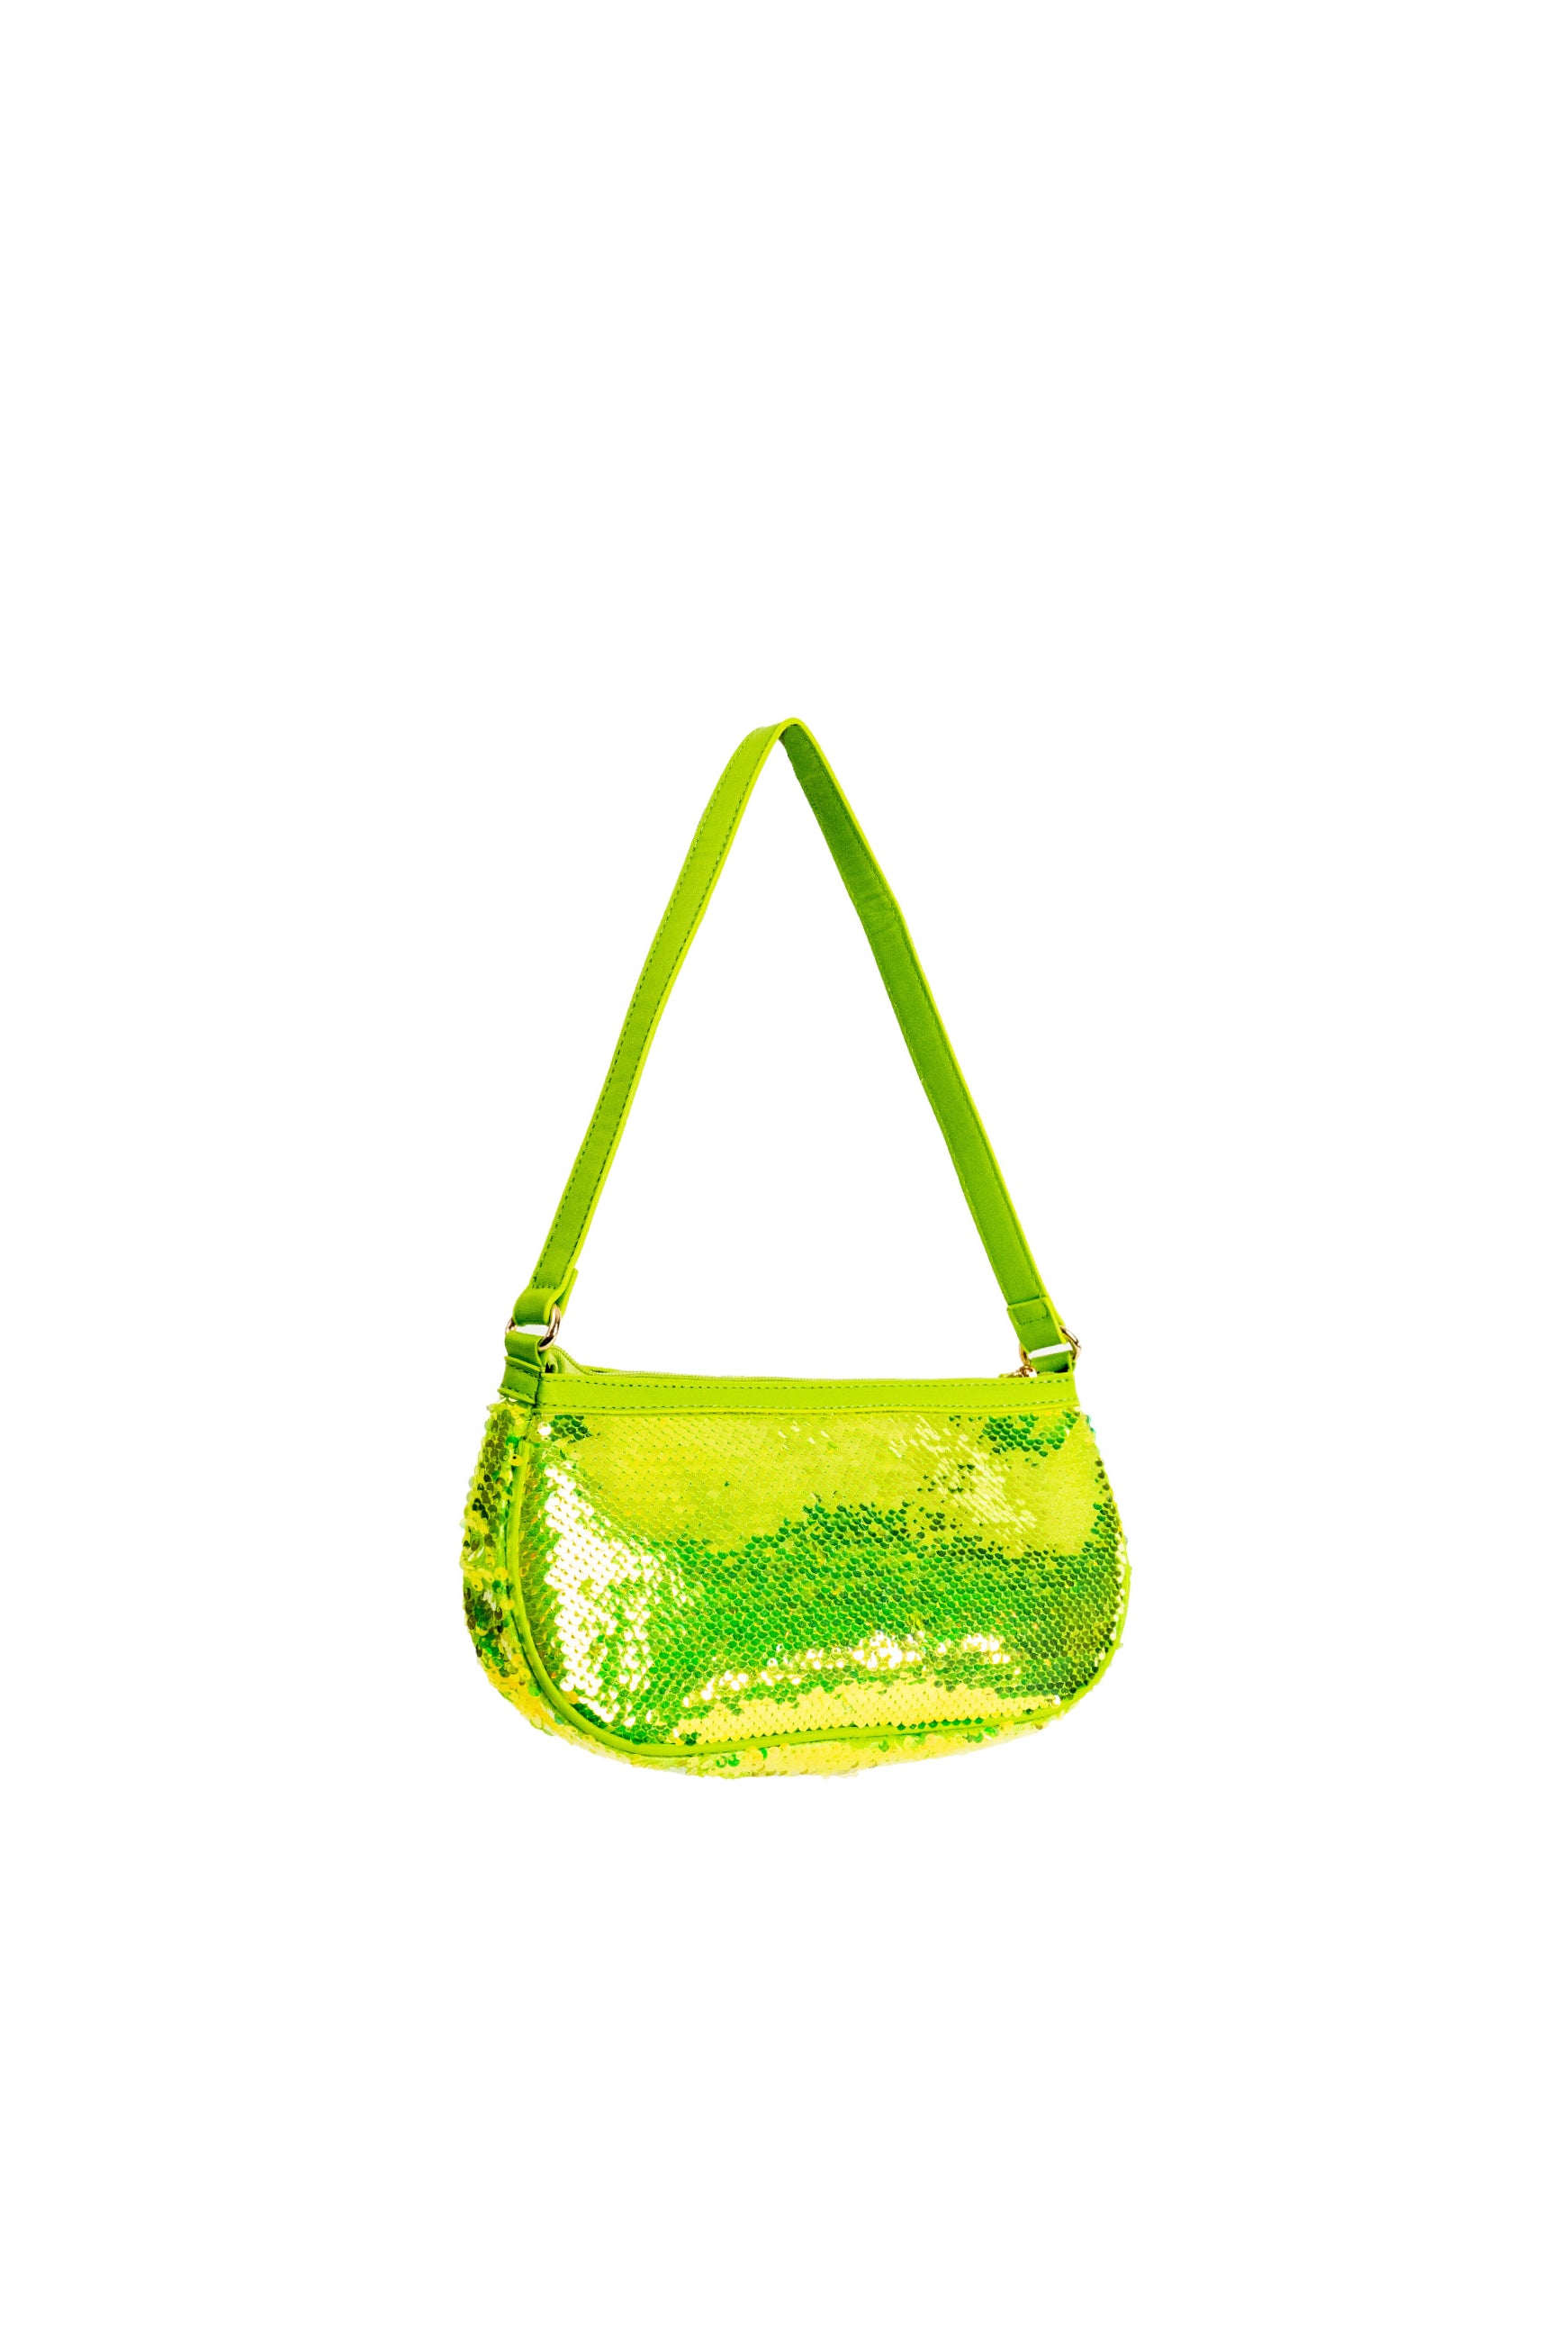 My Accessories London Sequin  shoulder Bag in green | Sparkly Bag | Bright Green Bag | Women's Accessories | Sequin shoulder Bag | Going Out Occasion